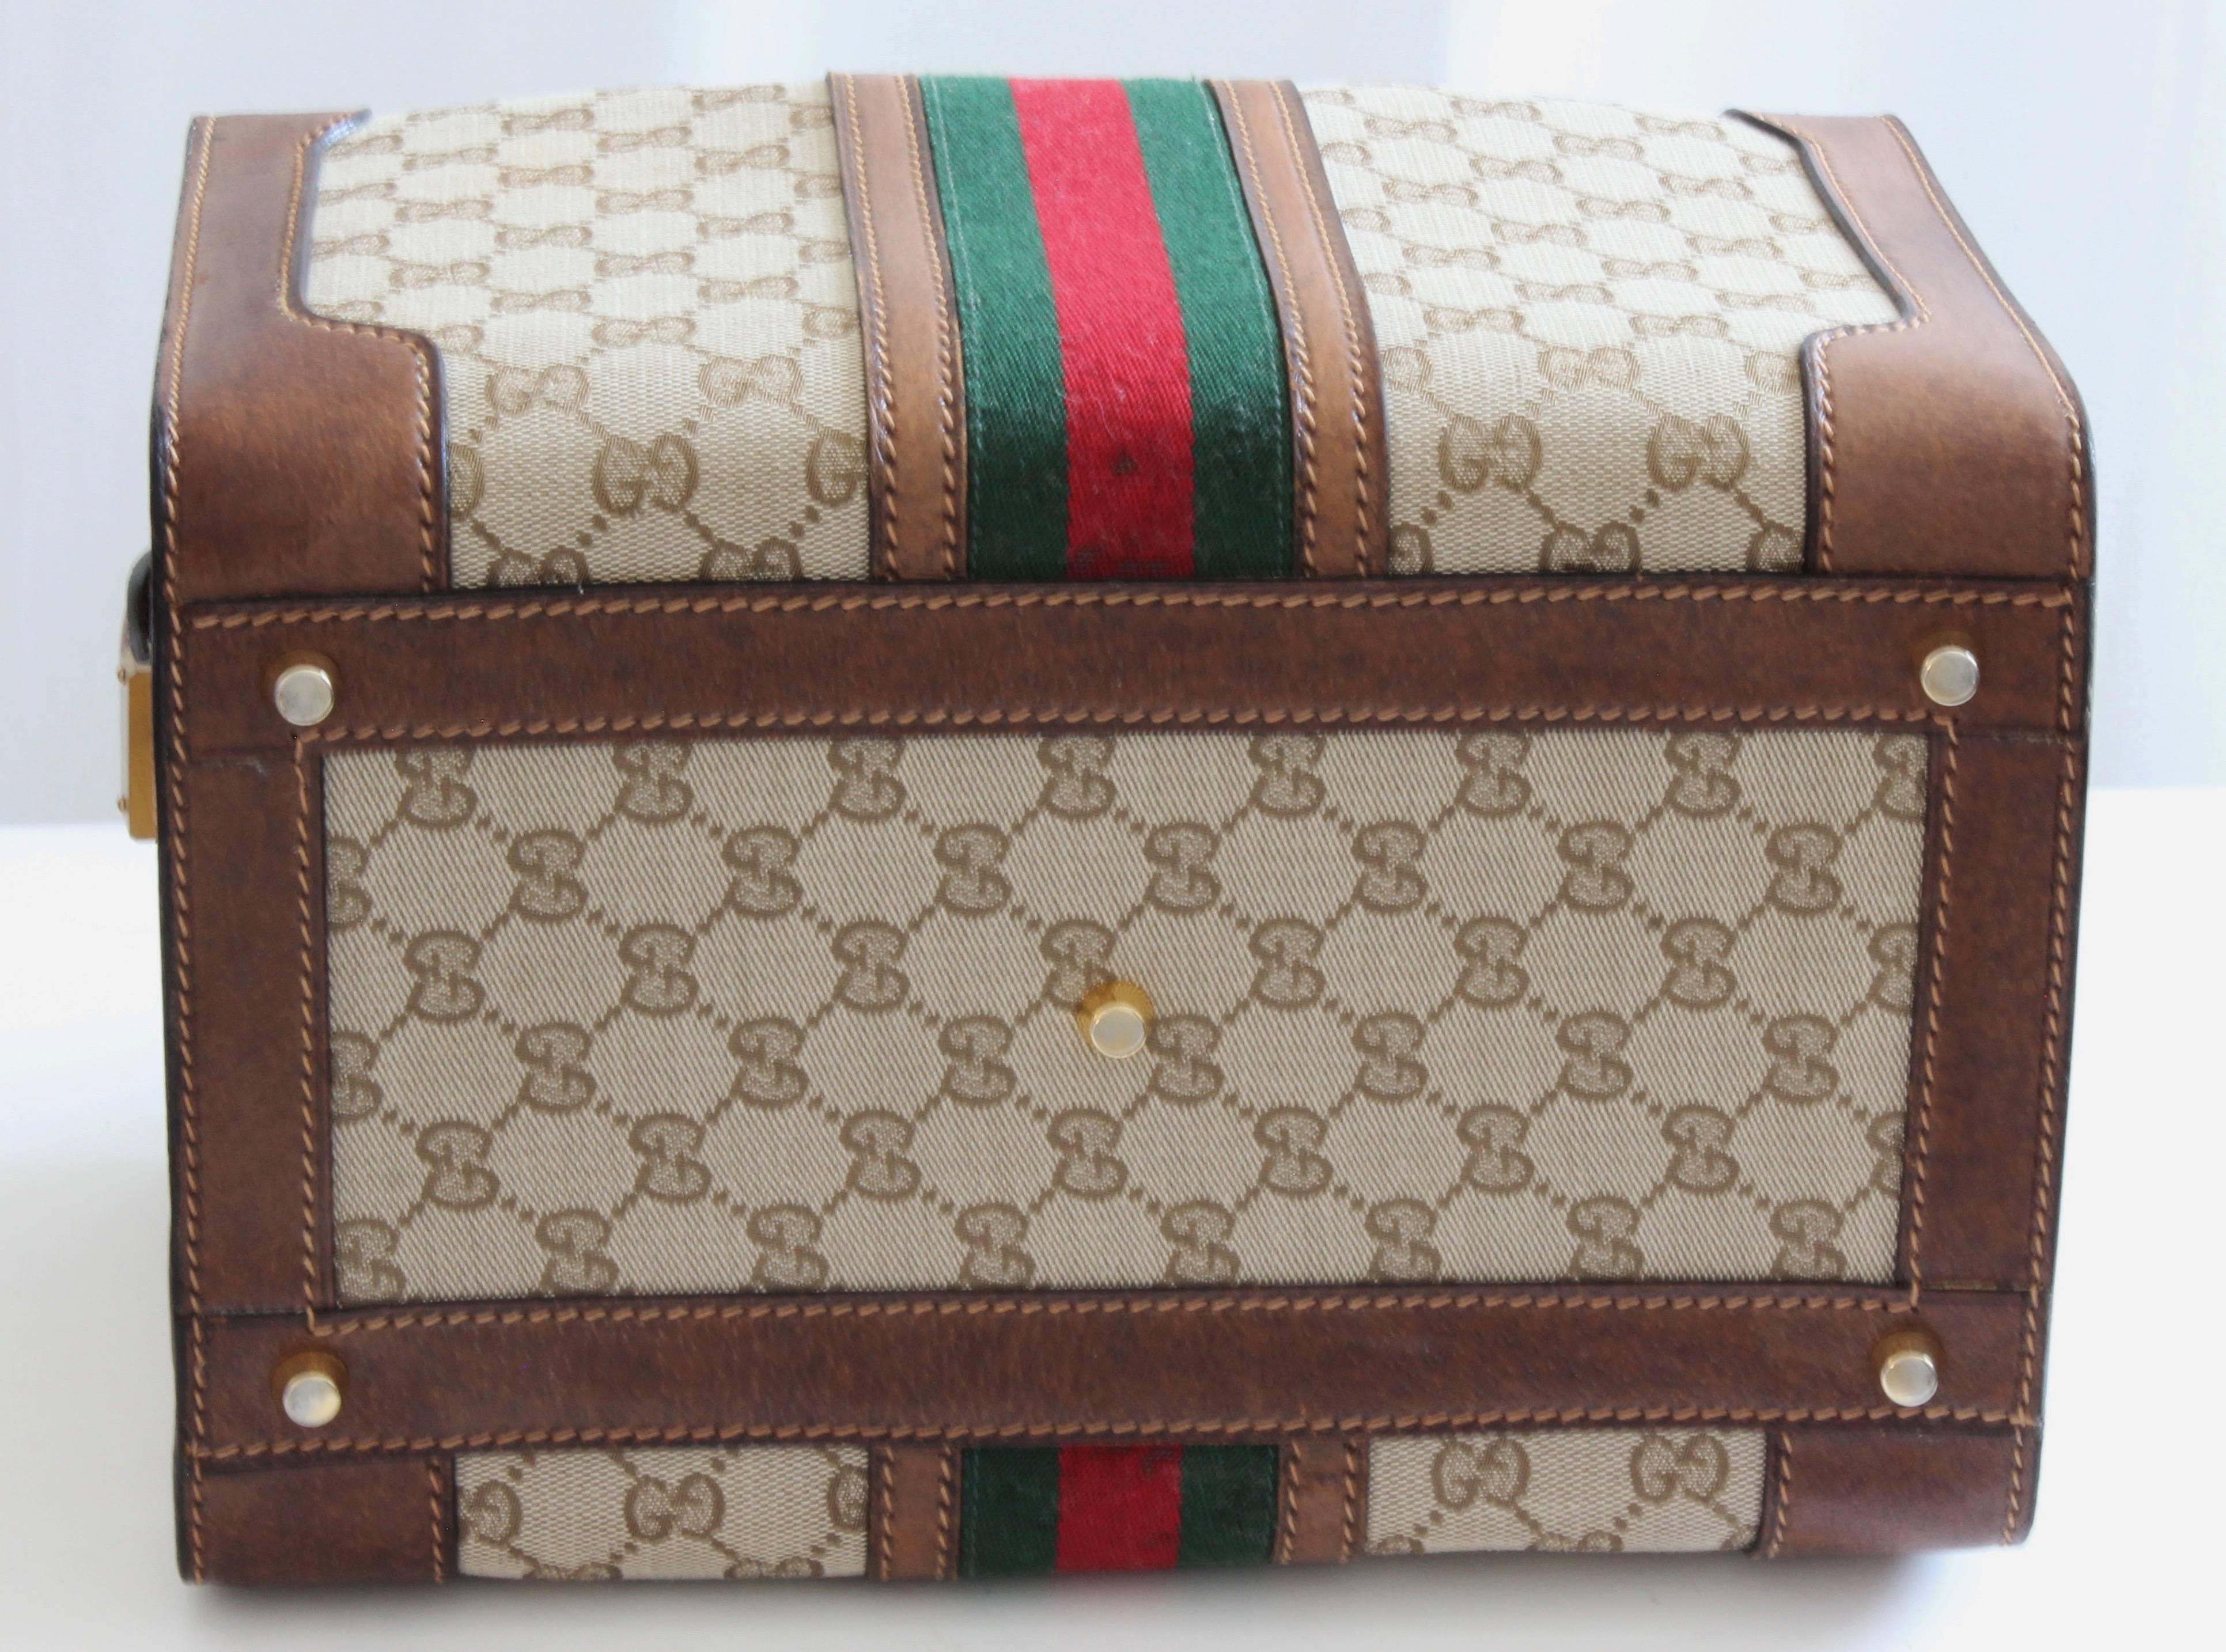 Women's or Men's Gucci Logo Doctors Bag Train Case Vanity Webbing Travel Carry On Luggage, 1970s